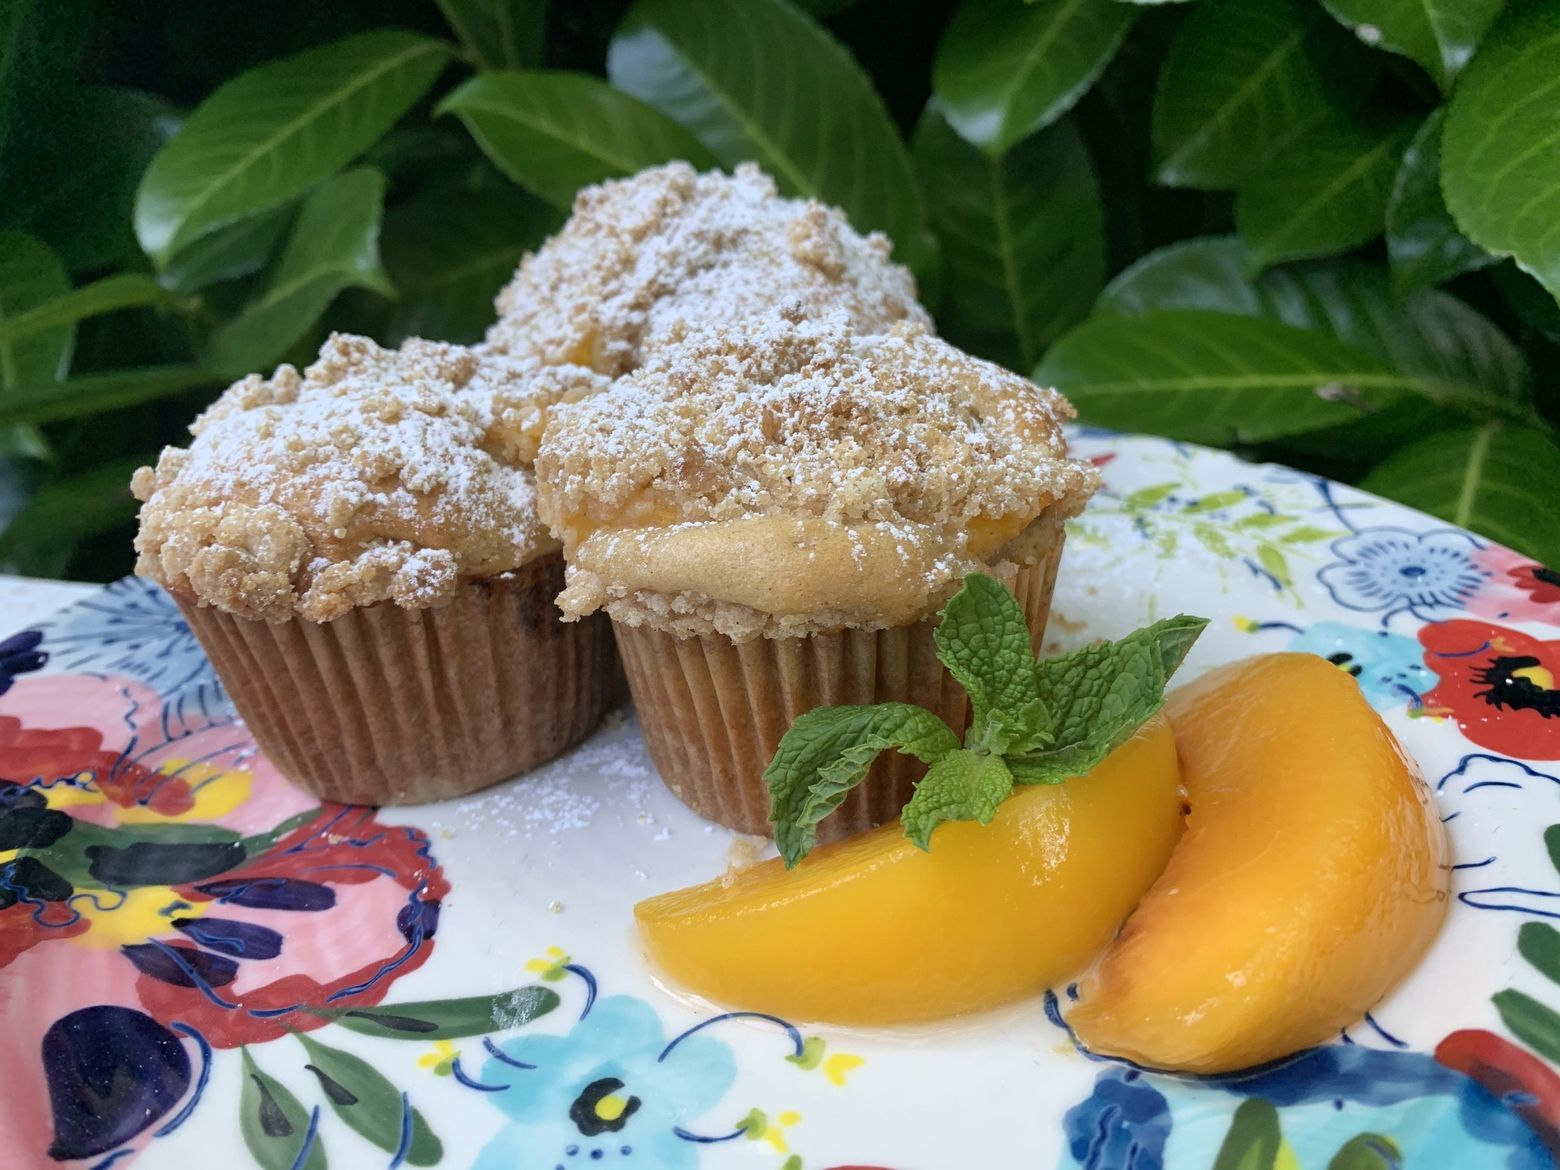 Fuel your school days with easy-to-make peach streusel breakfast muffins |  Cooking with Sadie | The Seattle Times